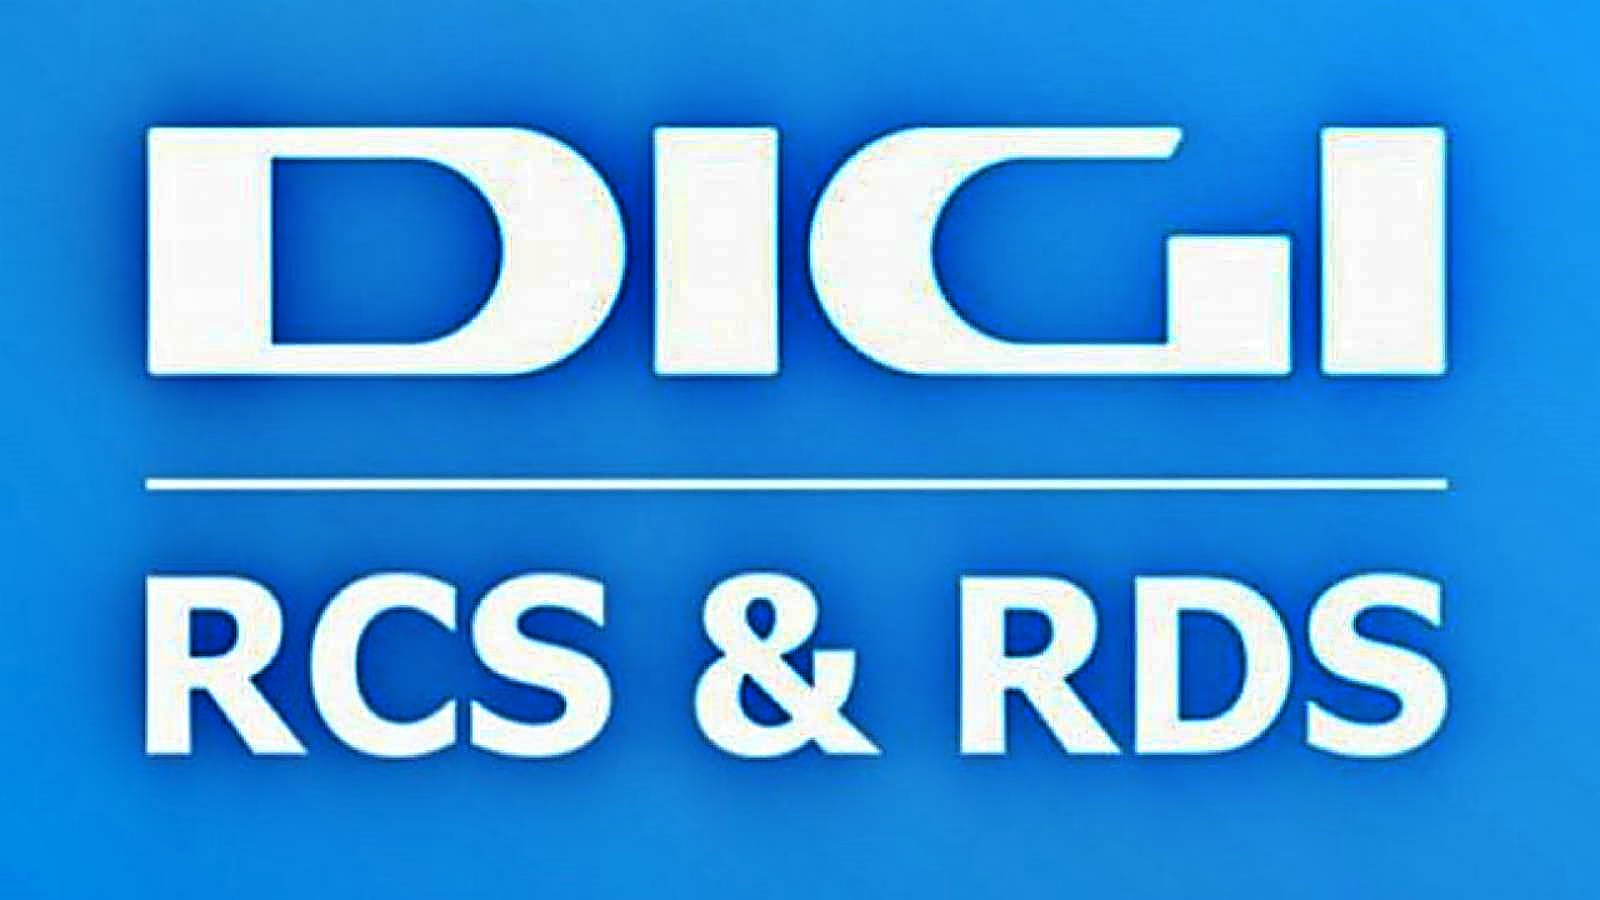 RCS & RDS Announces the Completion of the Sale of the Hungarian Subsidiary